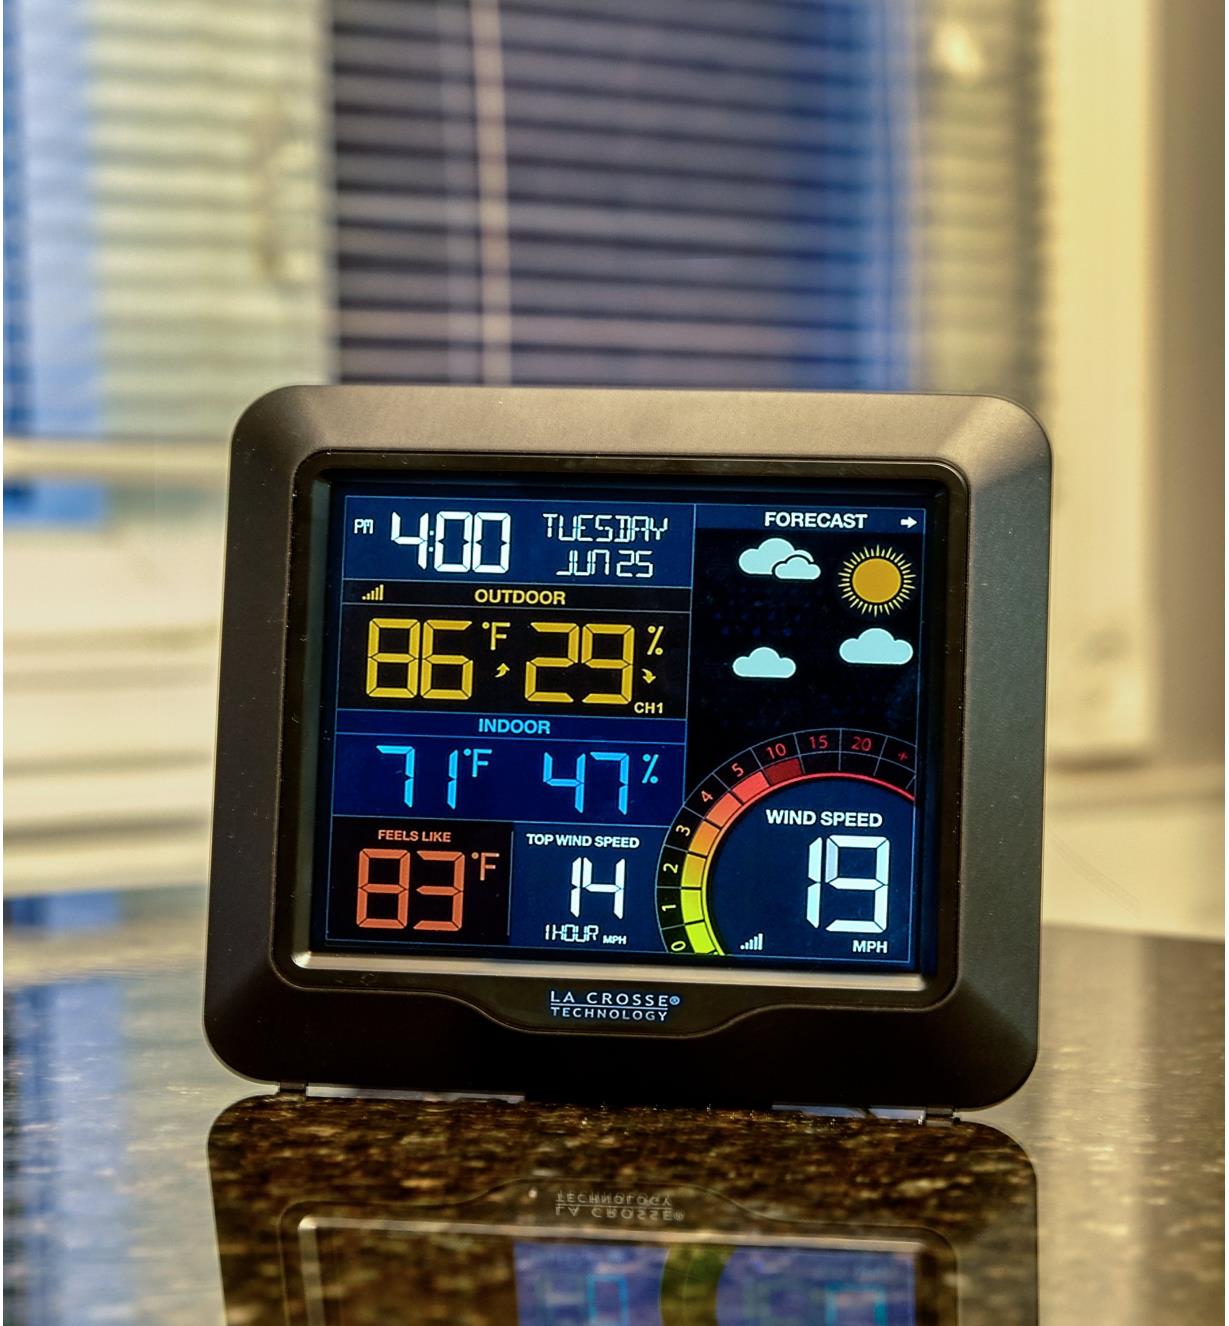 LCD screen of the wireless weather station displays date, time, forecast icons, temperature and humidity in Fahrenheit and wind speed in miles per hour